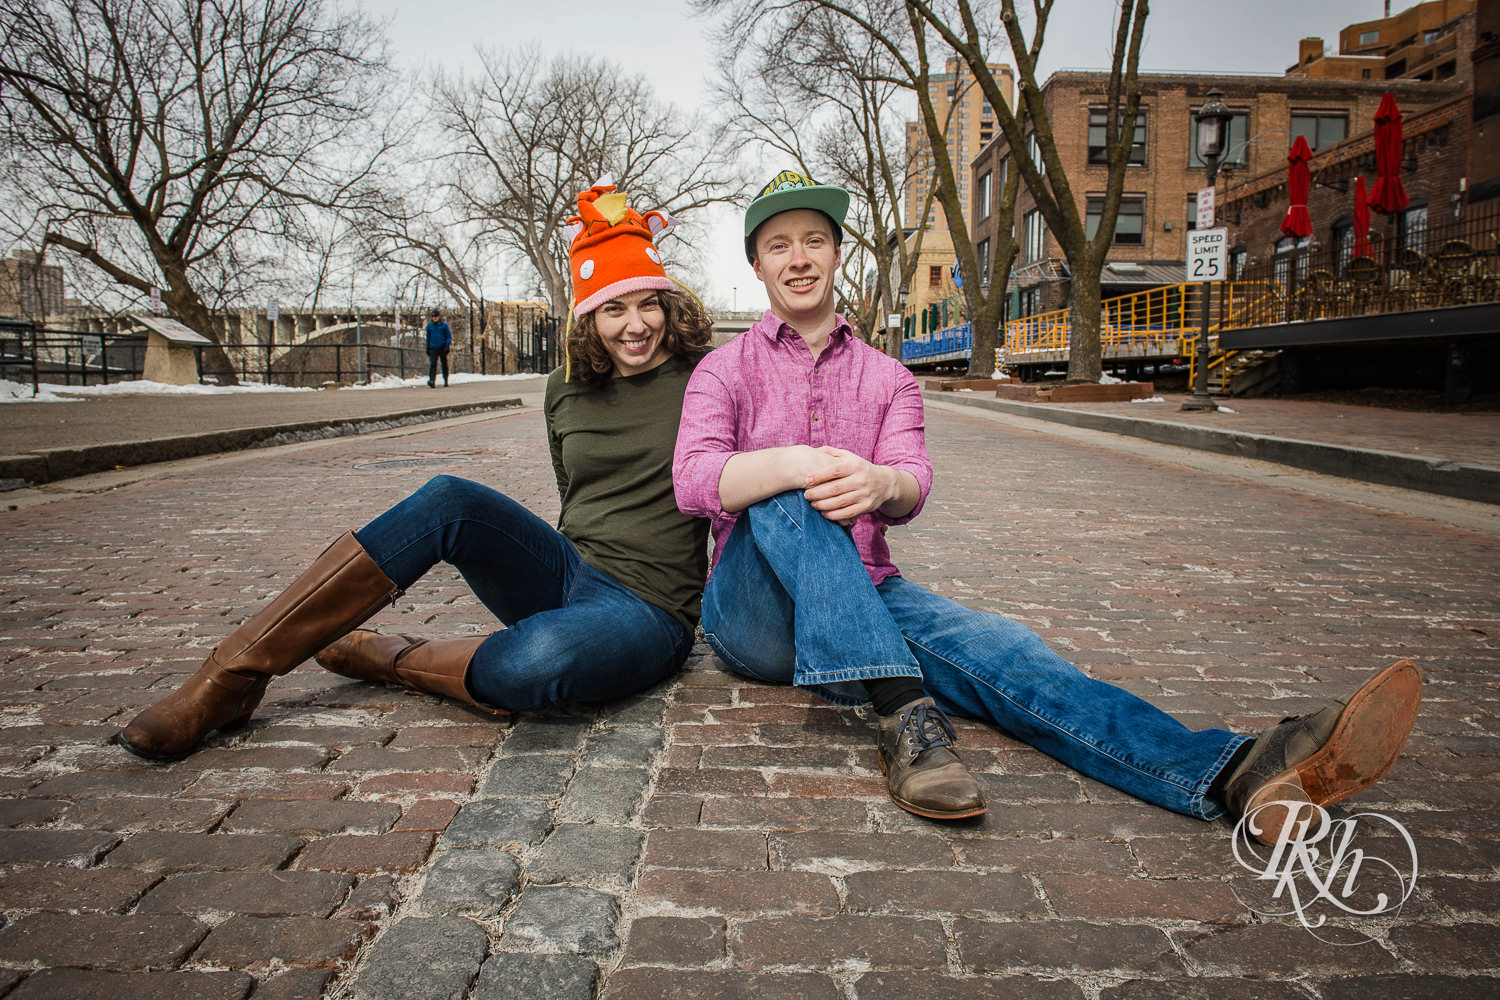 Man and woman laugh in the road wearing Pokemon hats in Minneapolis, Minnesota.